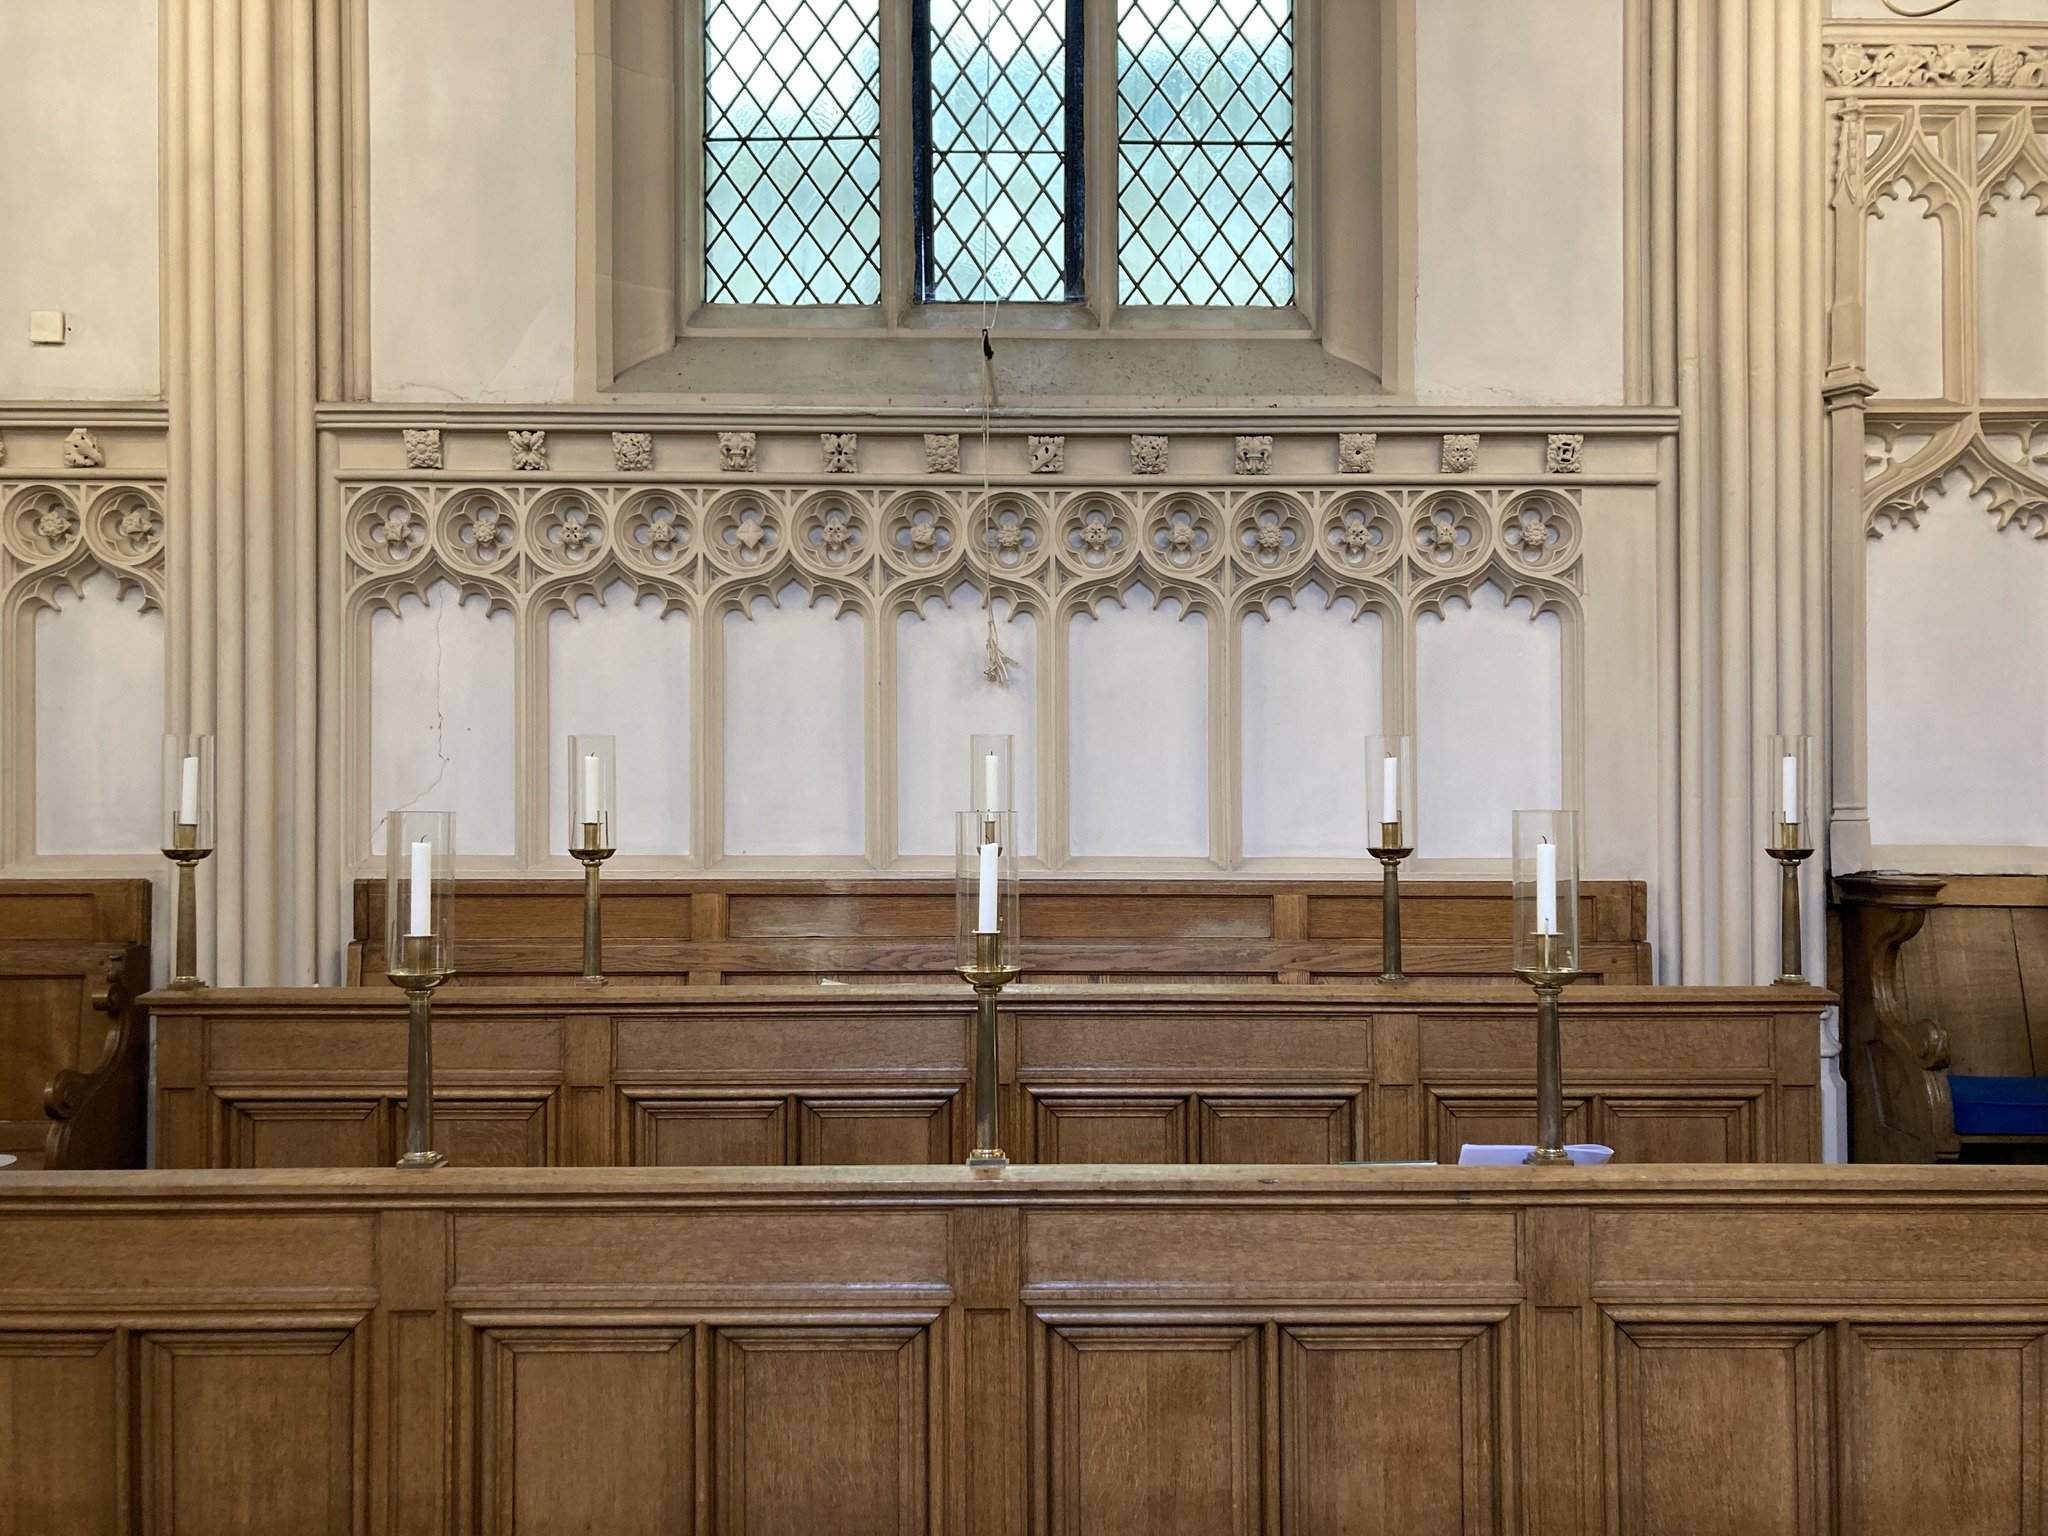 We are really pleased to announce that listed building consent has been granted for work to install speakers at the Grade-I Listed chapel at Corpus Christi College in Cambridge (@corpuscambridge). 

This involved a detailed consultation with conserva